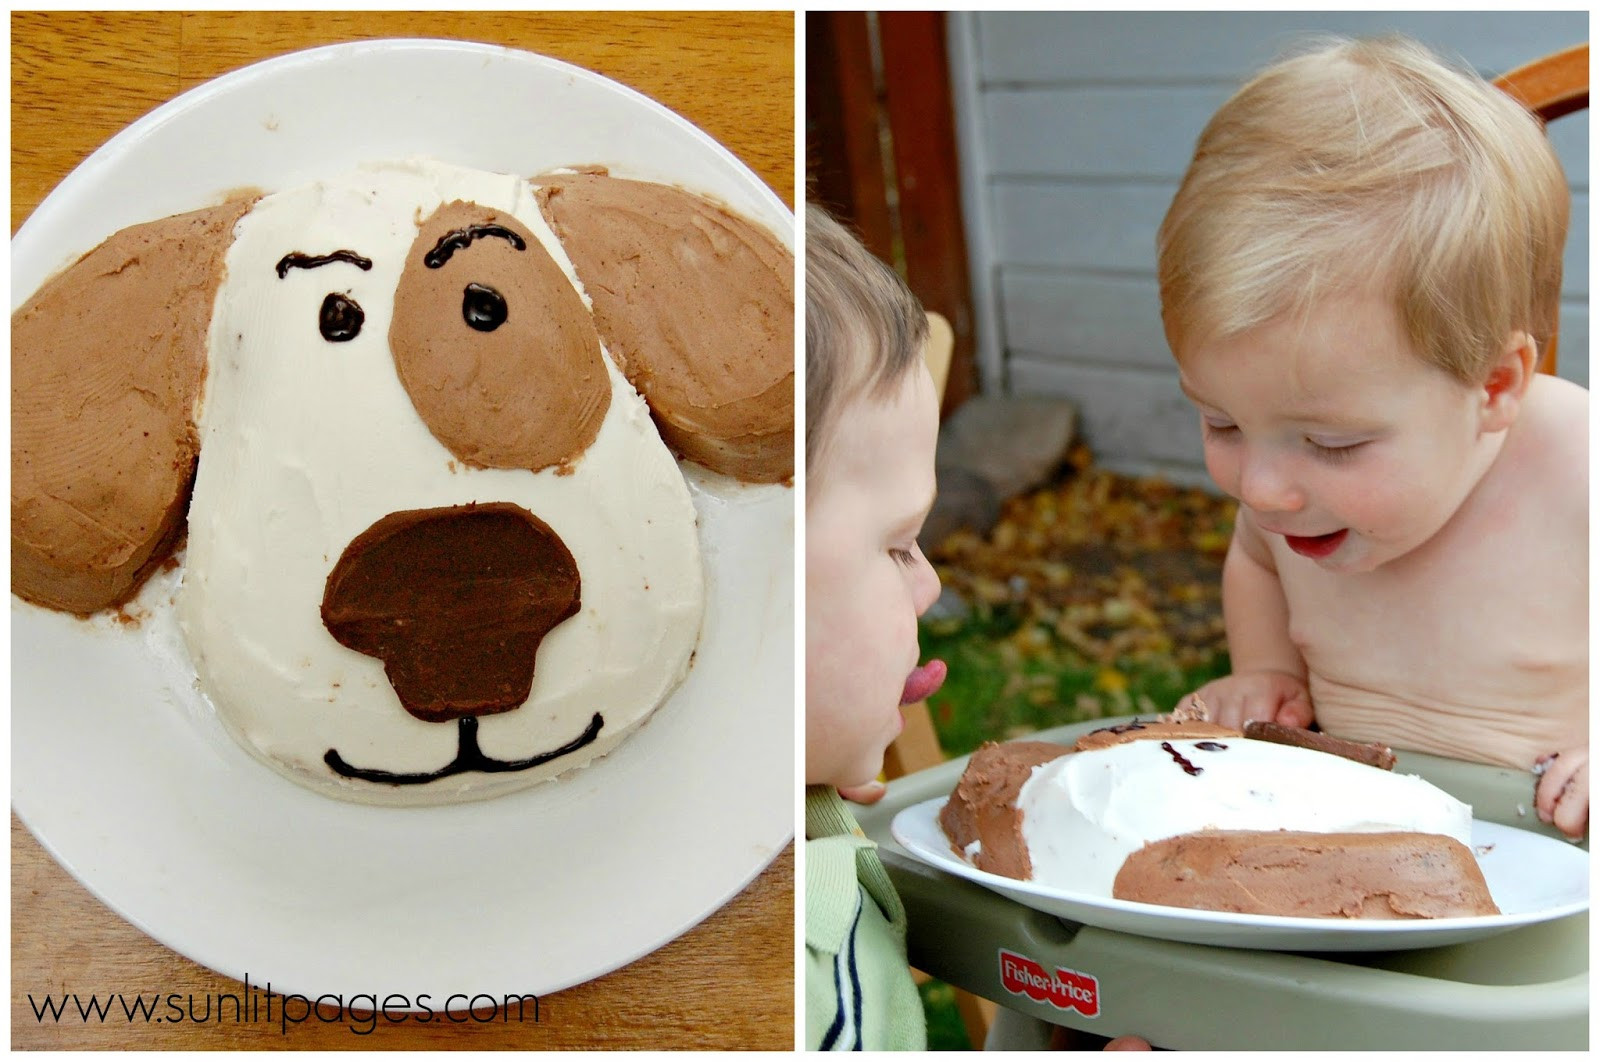 Puppy Birthday Cakes
 Sunlit Pages 15 Awesome Birthday Cakes for Kids